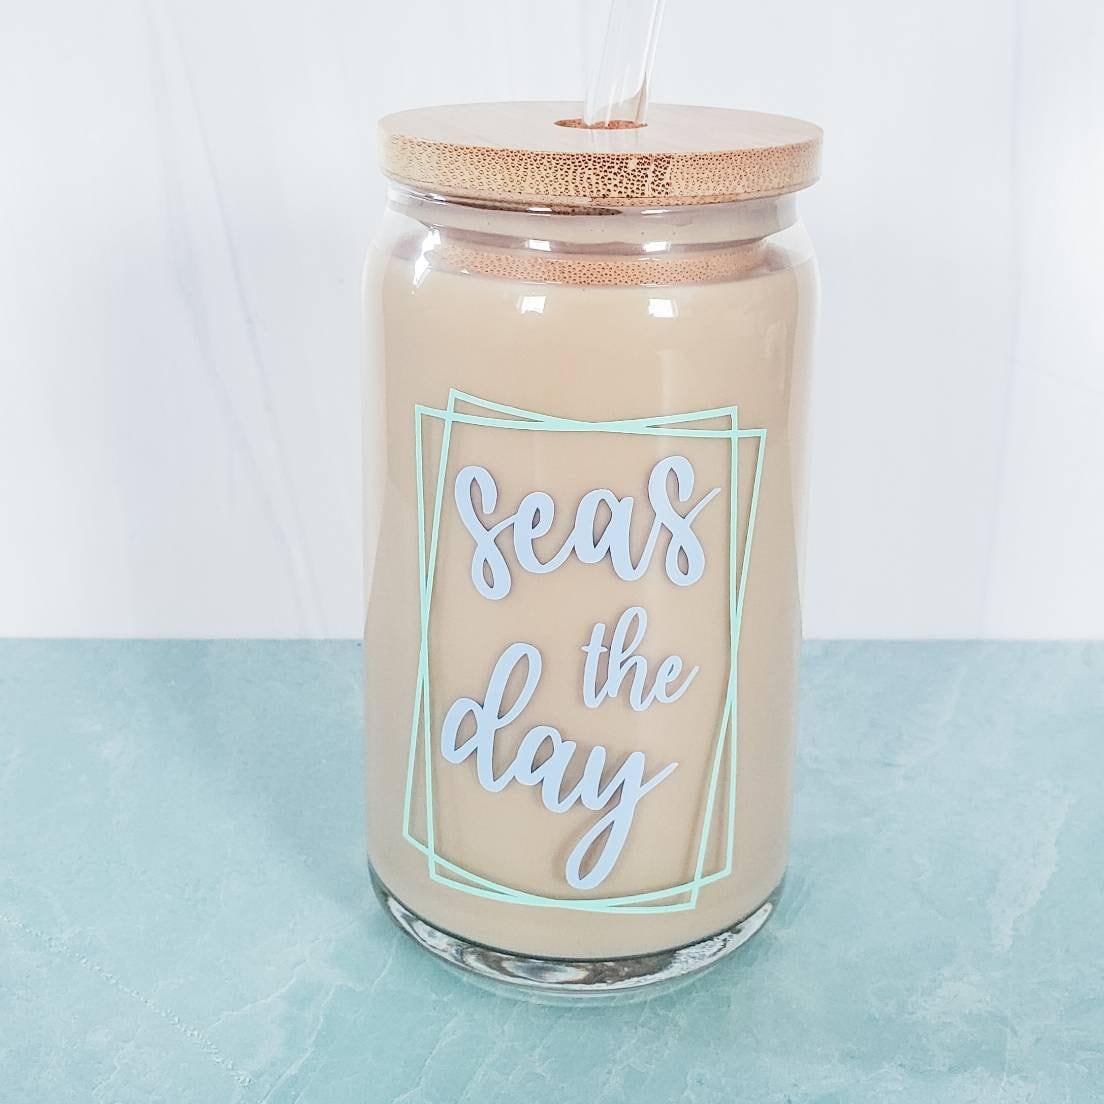 SEAS THE DAY Glass Can Cup Salt and Sparkle